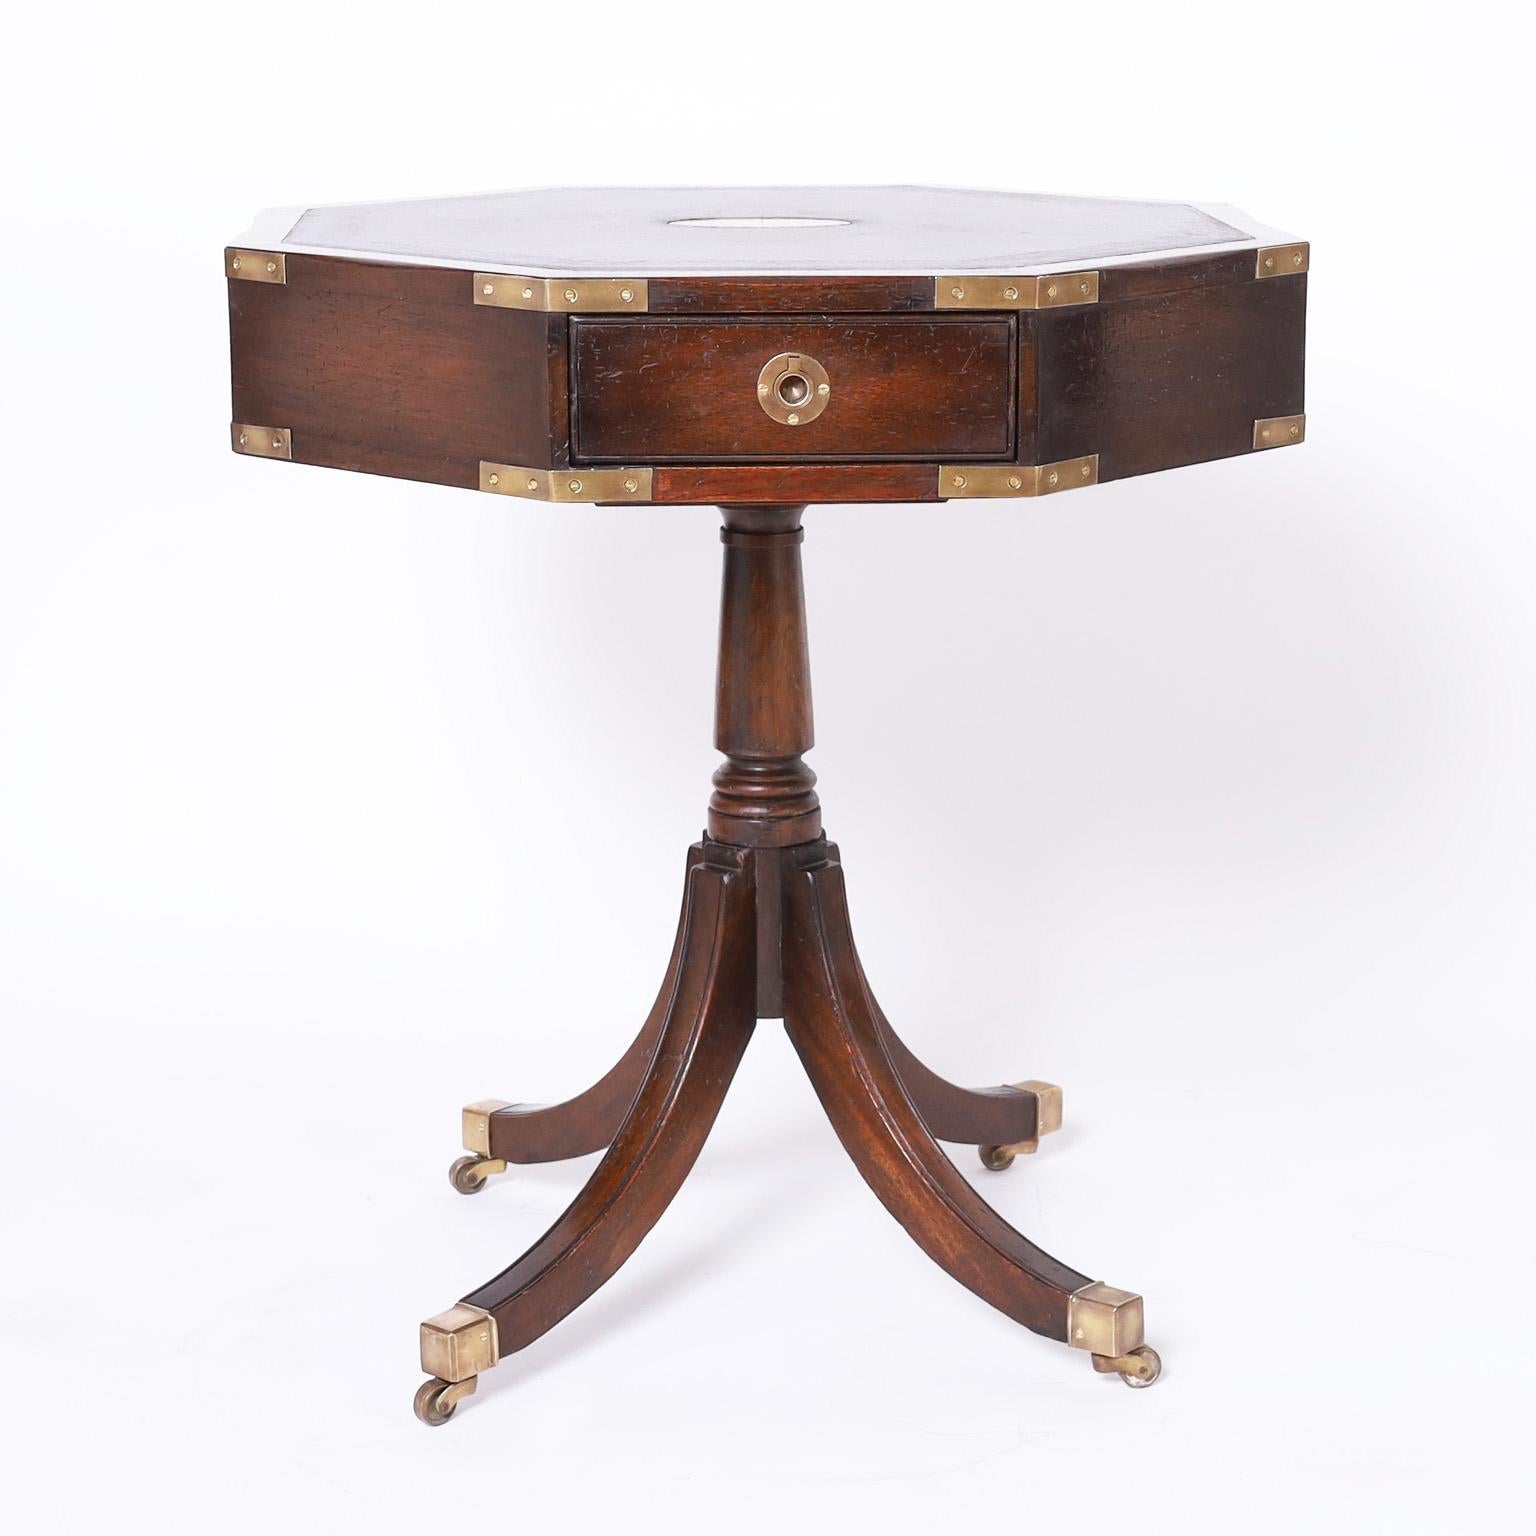 Impressive pair of English tables crafted in mahogany with dark green leather tops having oval brass medallions on an octagon case with four drawers having brass campaign hardware. The bases have turned pedestals and elegant Regency Sheraton style